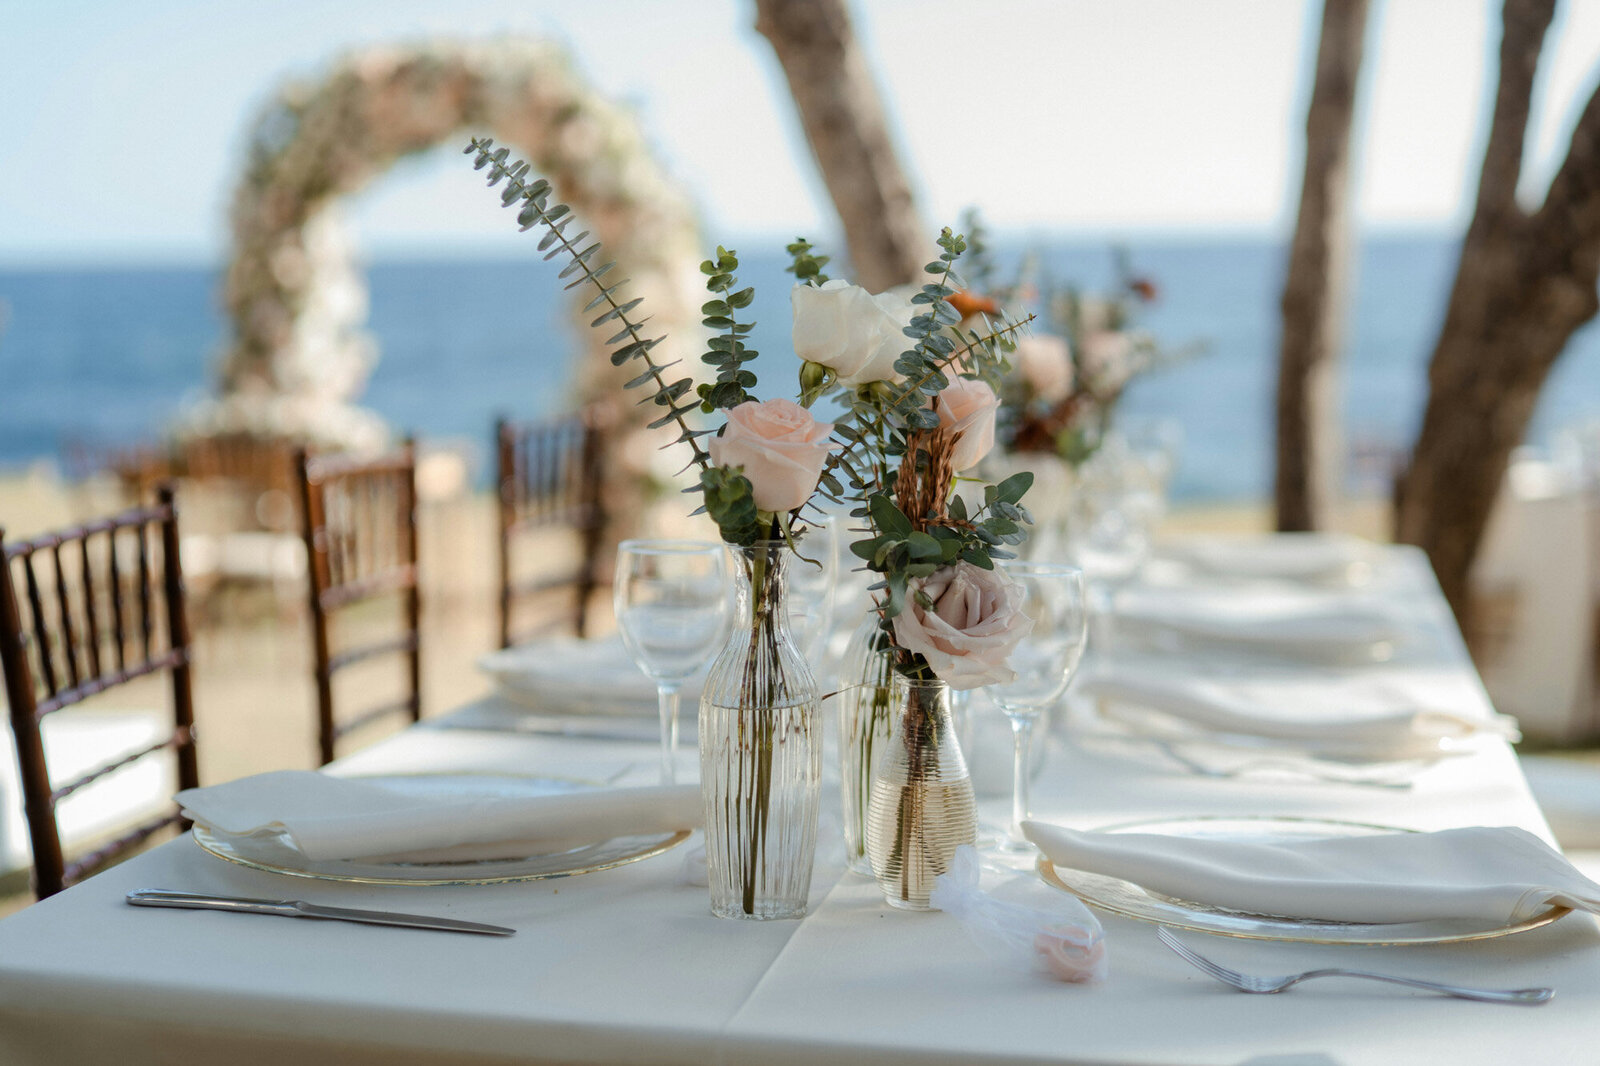 Floral centerpiece in a transparent glass with beach view behind